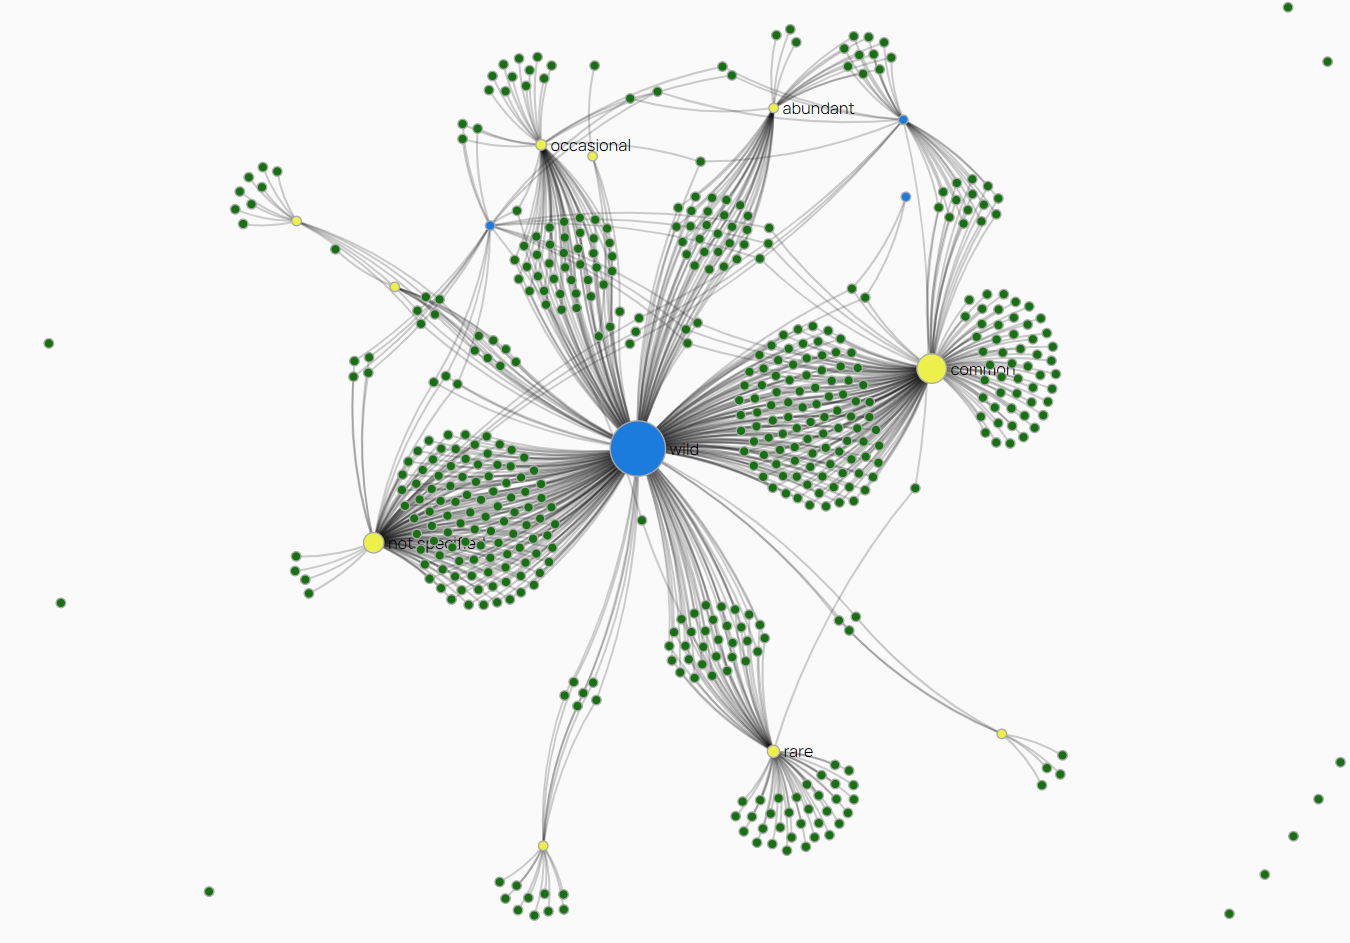 network visualization in green and blue